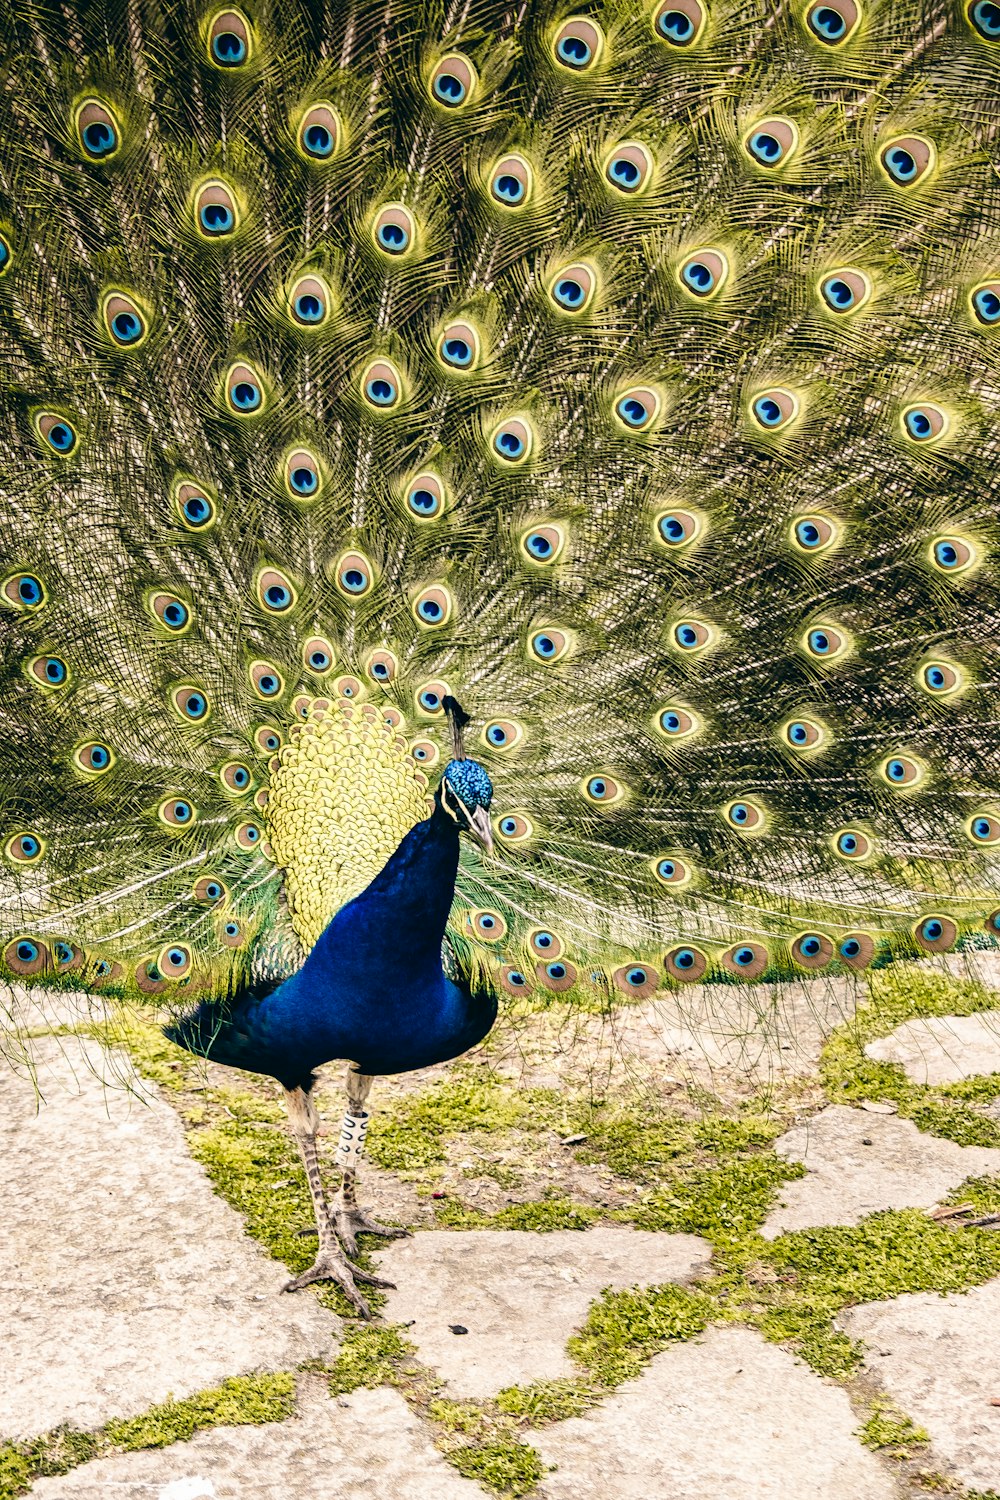 a peacock with its feathers spread